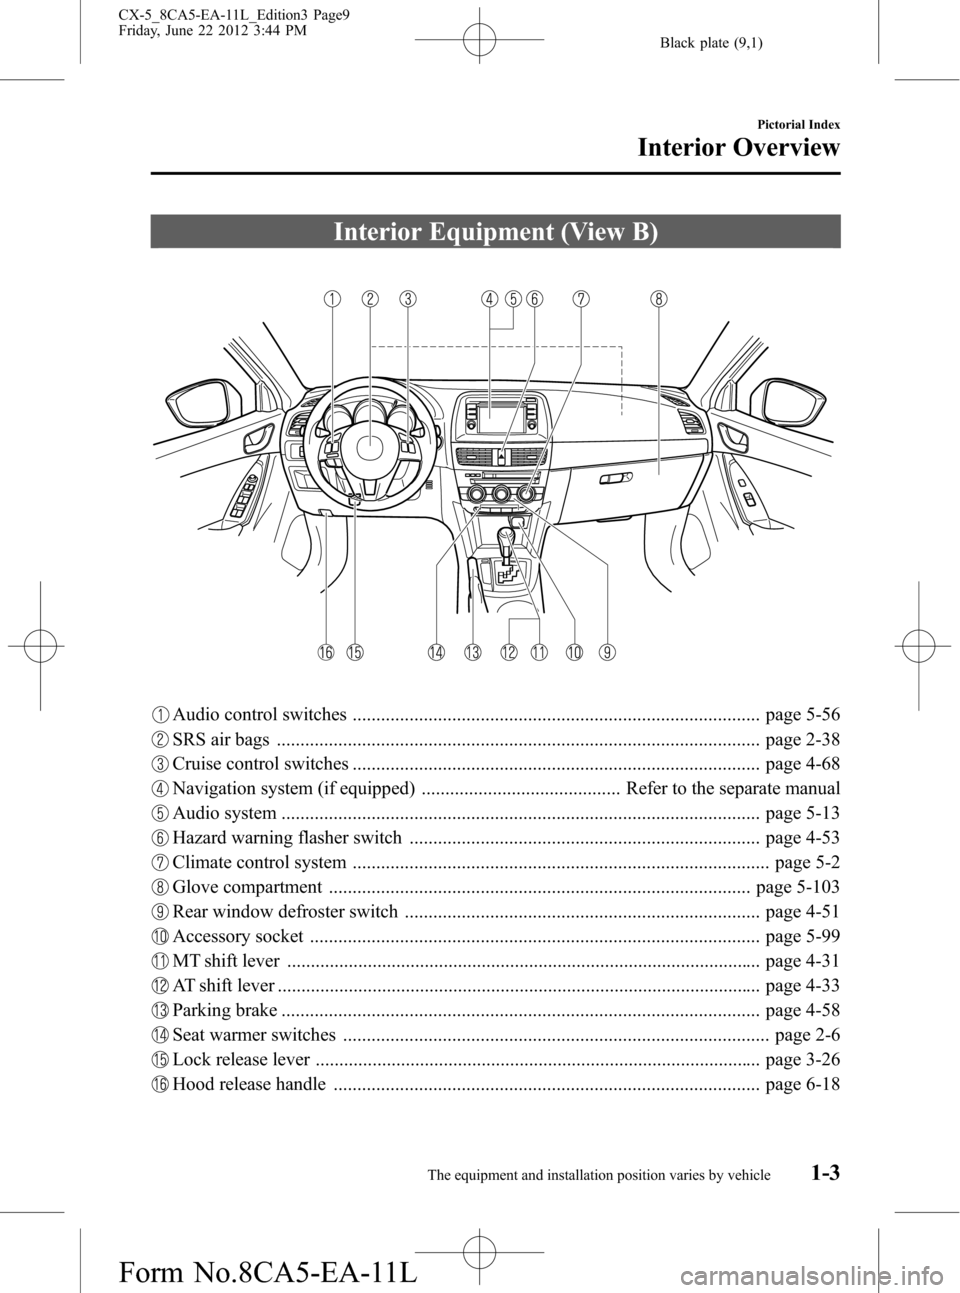 MAZDA MODEL CX-5 2013  Owners Manual (in English) Black plate (9,1)
Interior Equipment (View B)
Audio control switches ...................................................................................... page 5-56
SRS air bags .....................